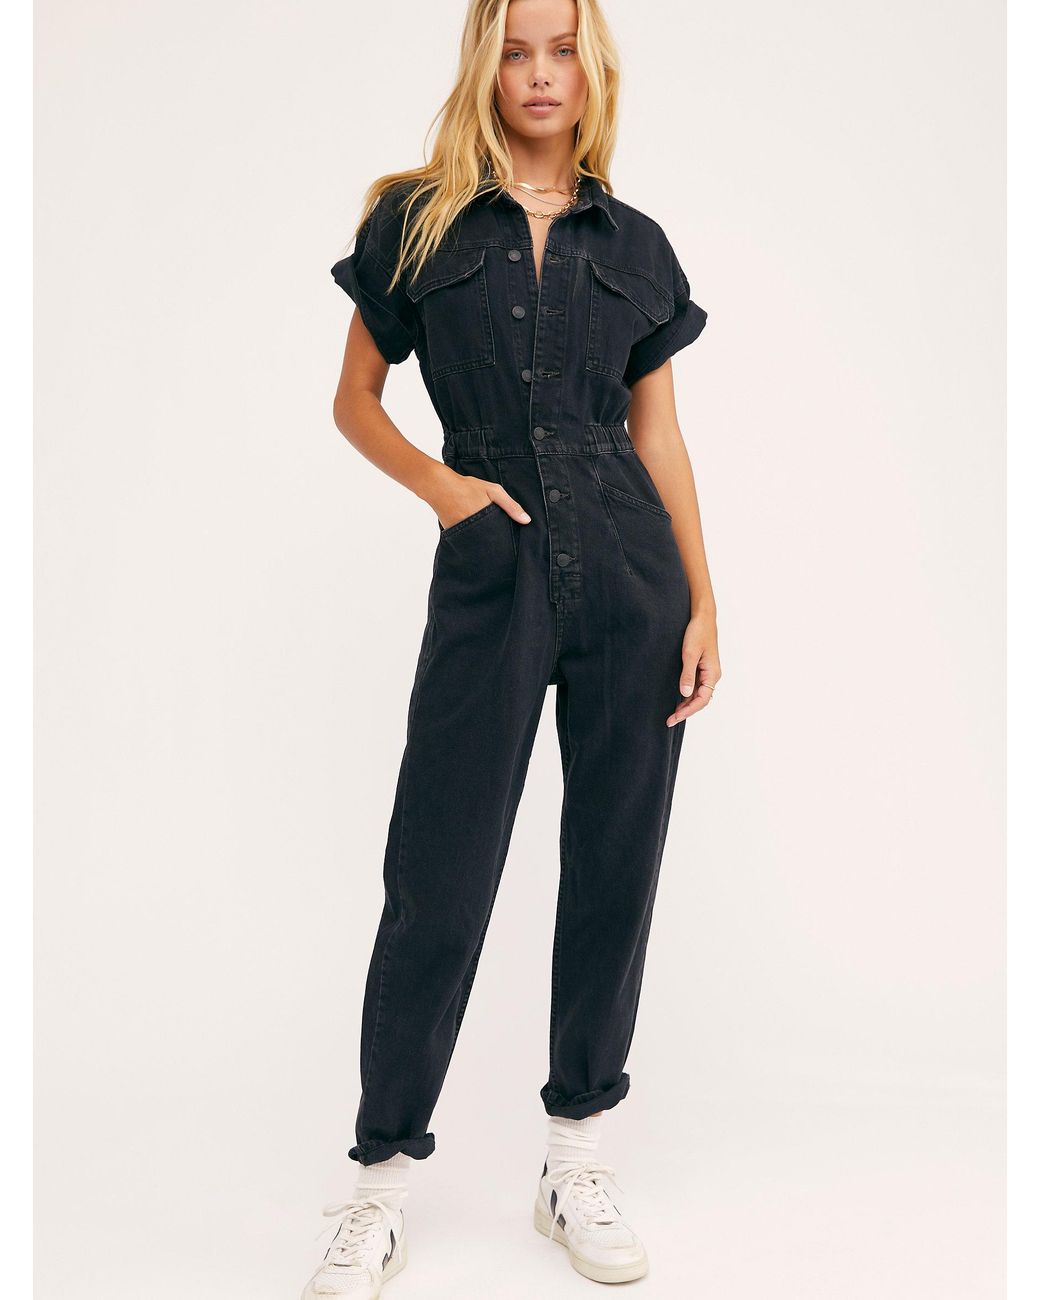 Free People Marci Coverall in Black | Lyst